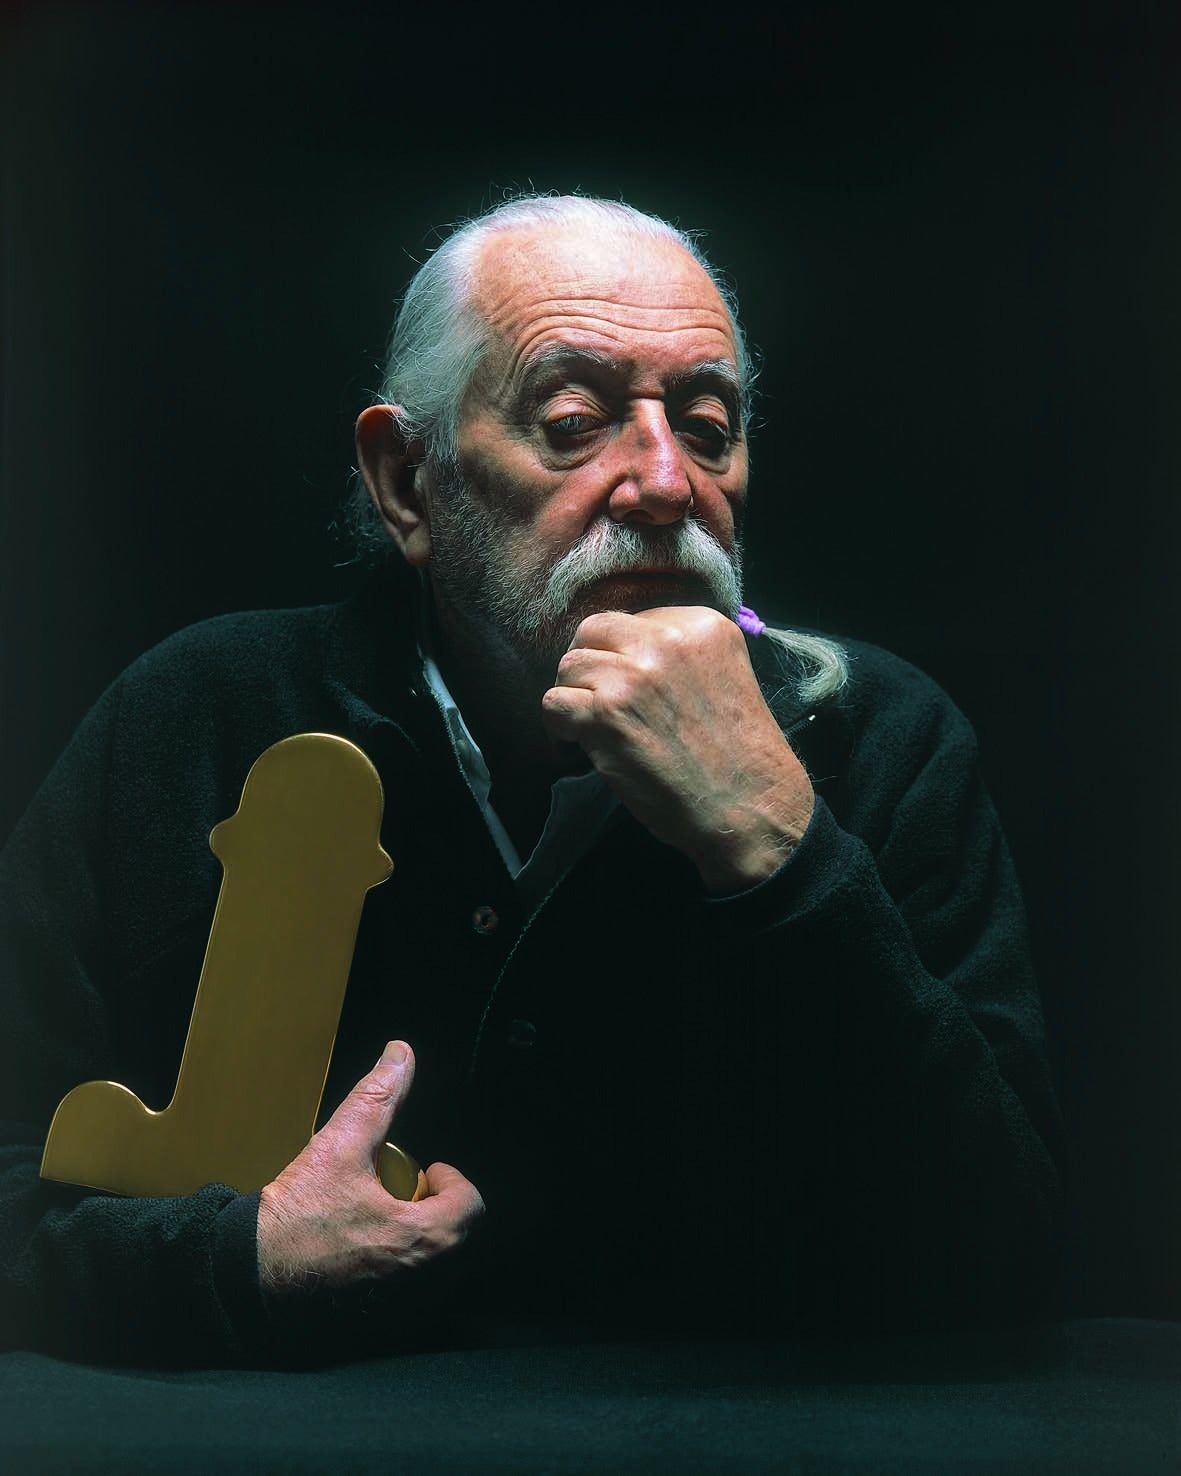 In 1973 Ettore Sottsass created the famous Shiva vase for BD Barcelona. The original design was in gold (the second image showed Ettore Sottsass with the prototype in his hand).

But this vase was always produced by BD Barcelona in pink